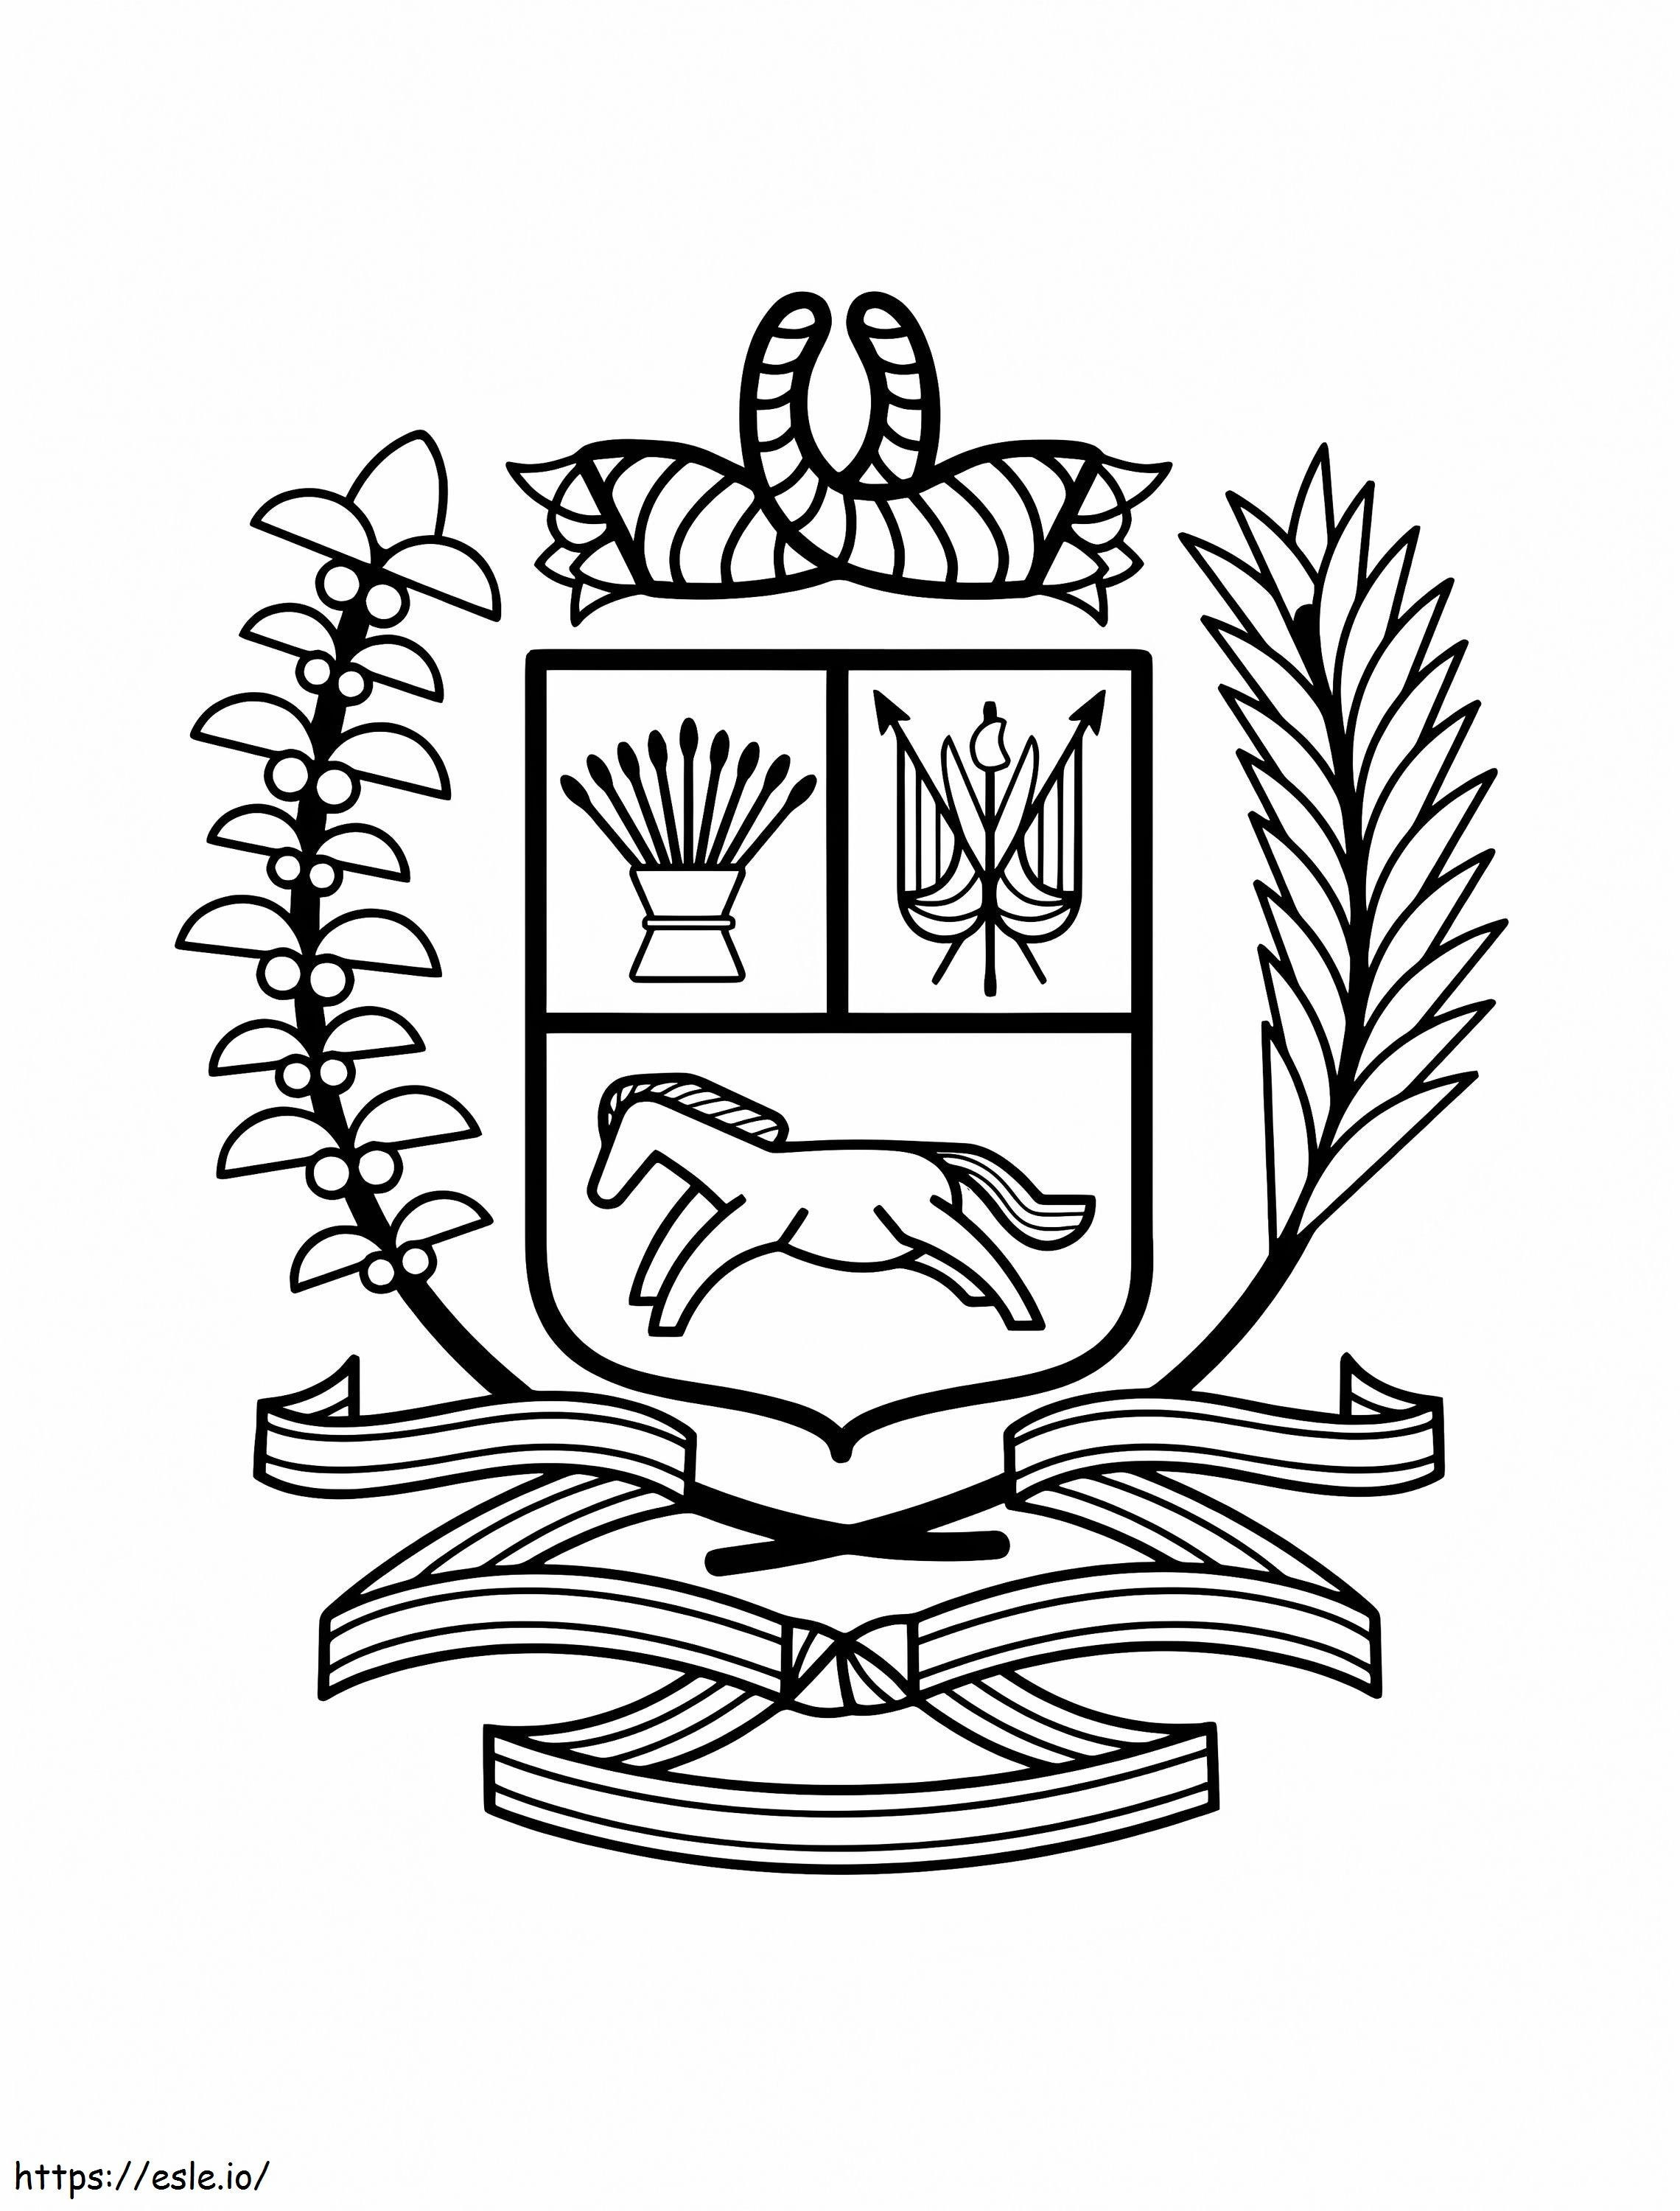 Coat Of Arms Of Venezuela coloring page